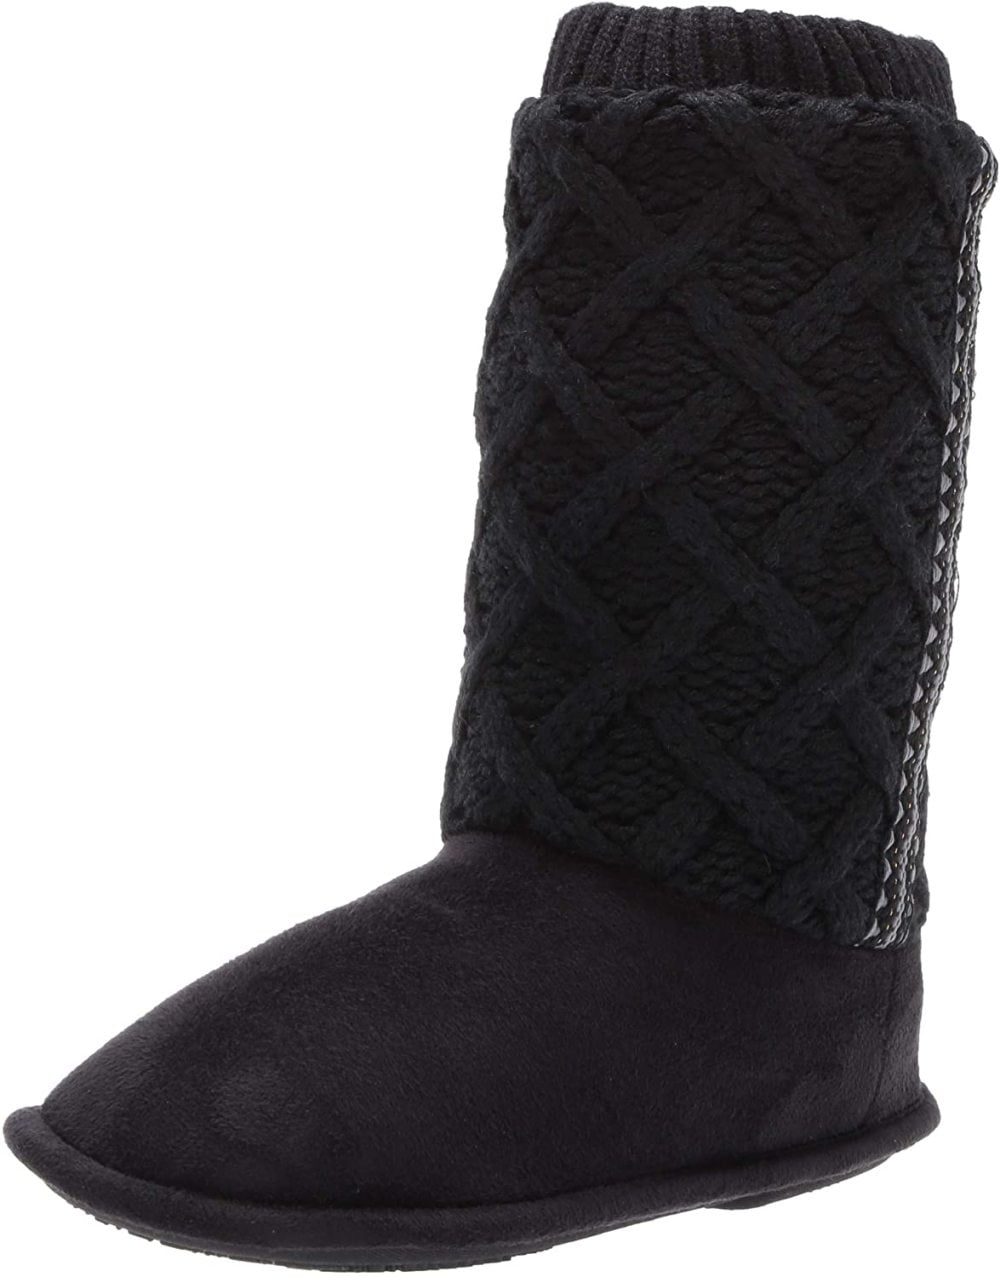 ISOTONER Womens Sweater Knit Tessa Tall Boot House Slipper with All Around Memory Foam Comfort